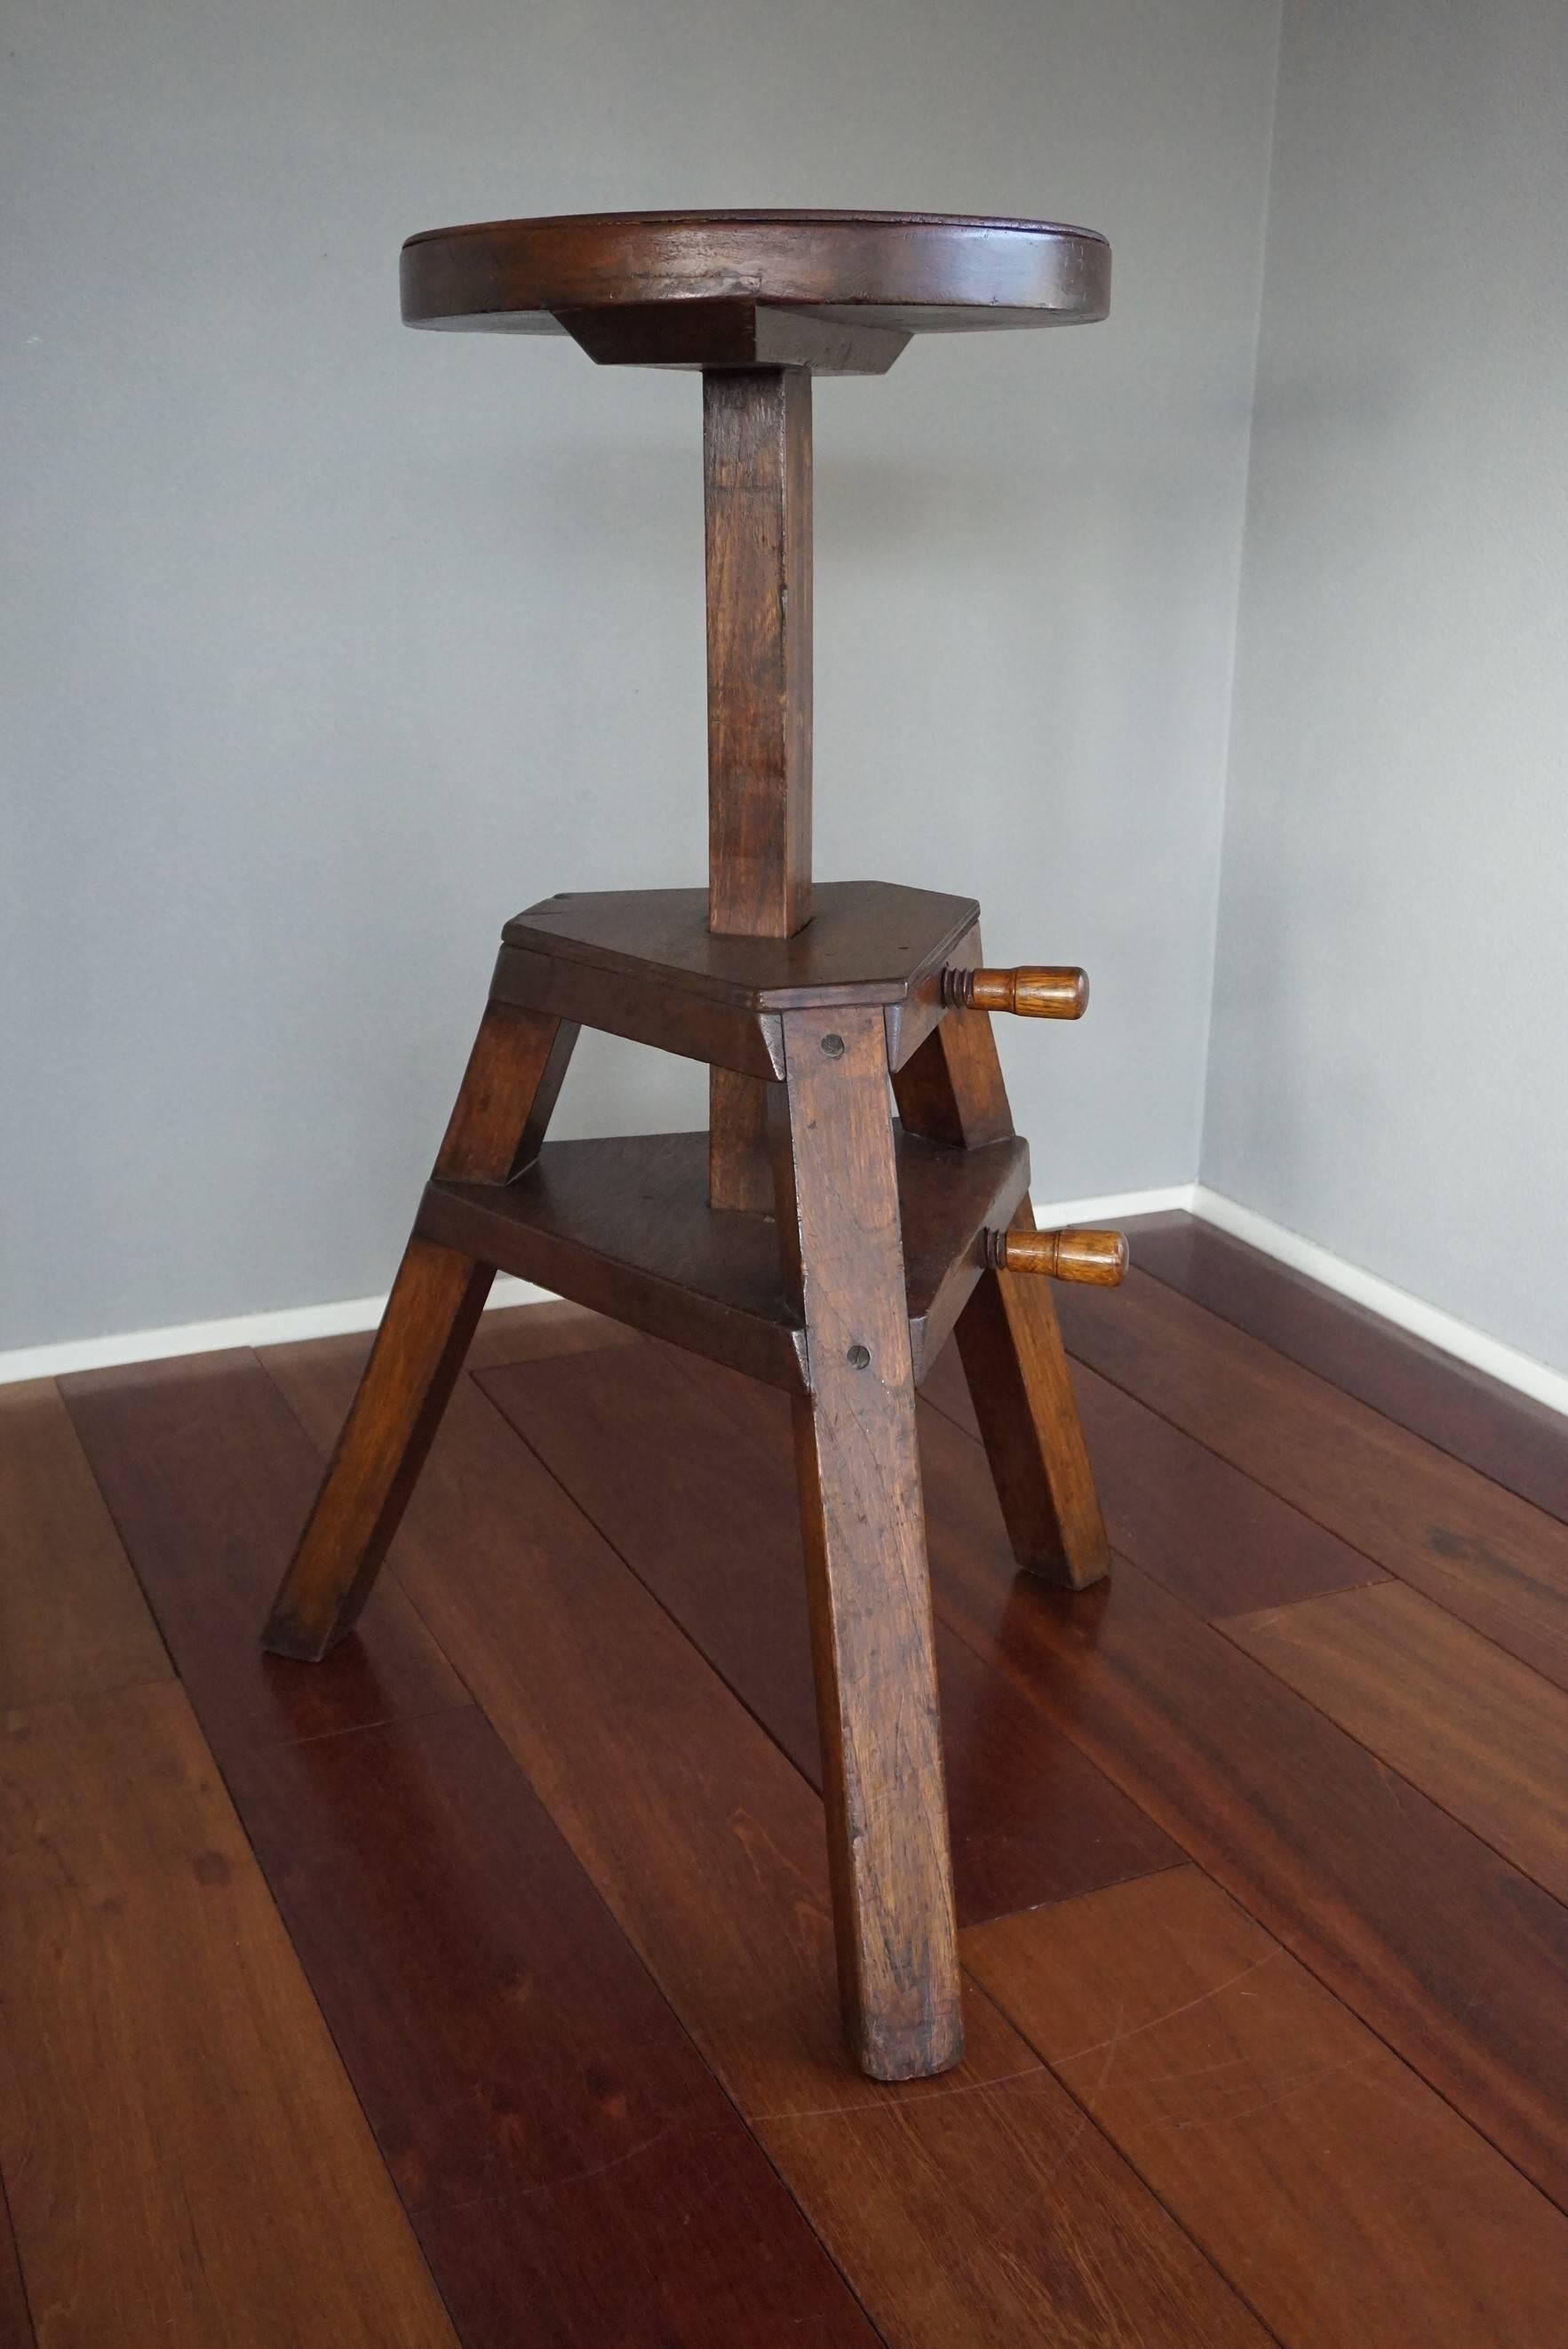 Rare sculptors modeling stand work easel from, circa 1900-1915.

This stylish Arts and Crafts Stand on a tripod base is almost entirely made of solid teak wood. This gives it its sturdy look and feel and it is also perfect for displaying more